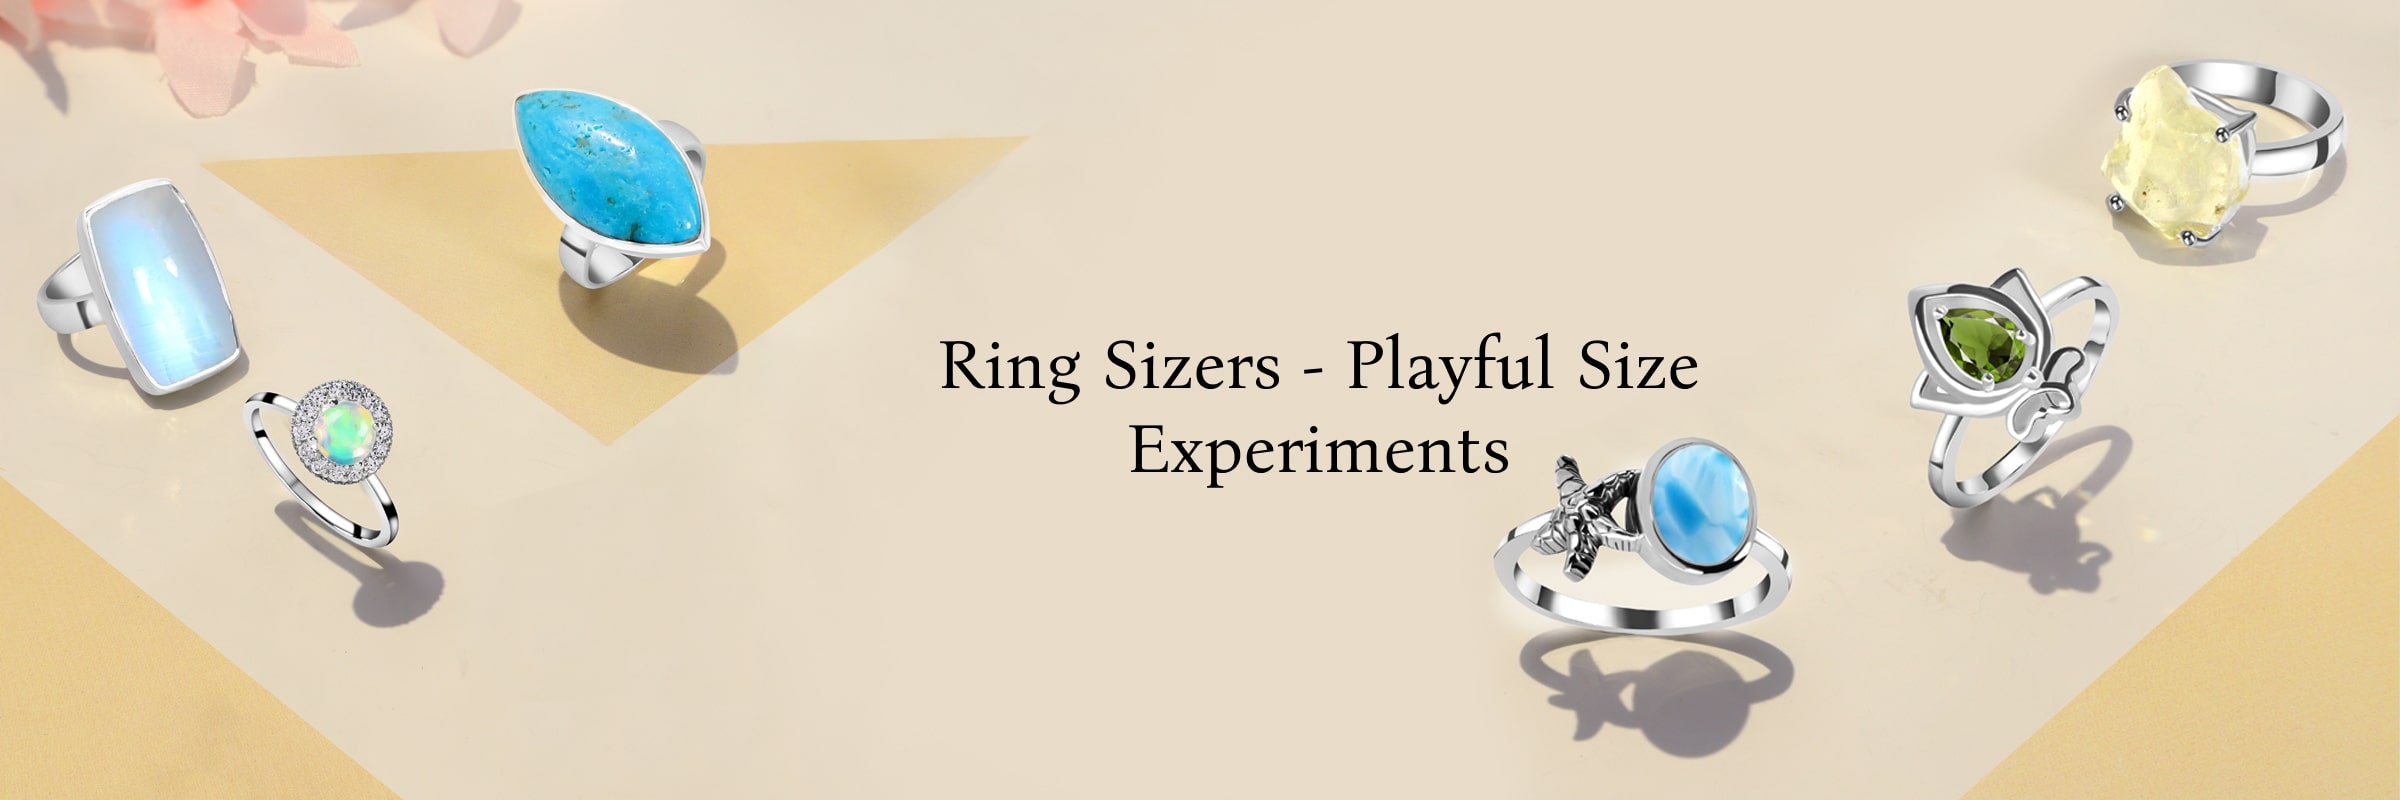 Experiment with Ring Sizers